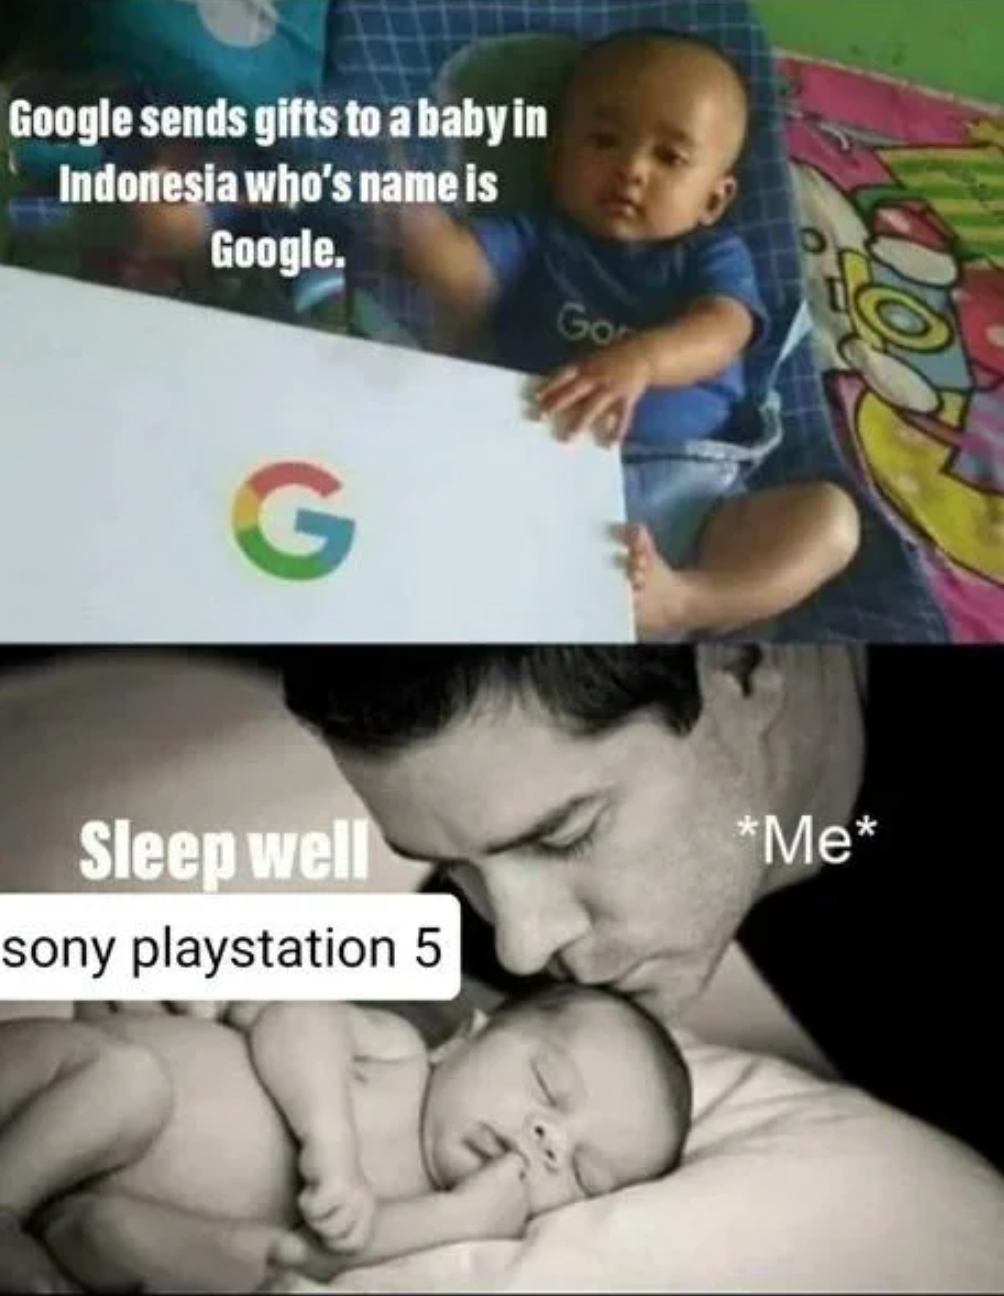 funny gaming memes - facial expression - Google sends gifts to a baby in Indonesia who's name is Google. Gos G Me Sleep well sony playstation 5